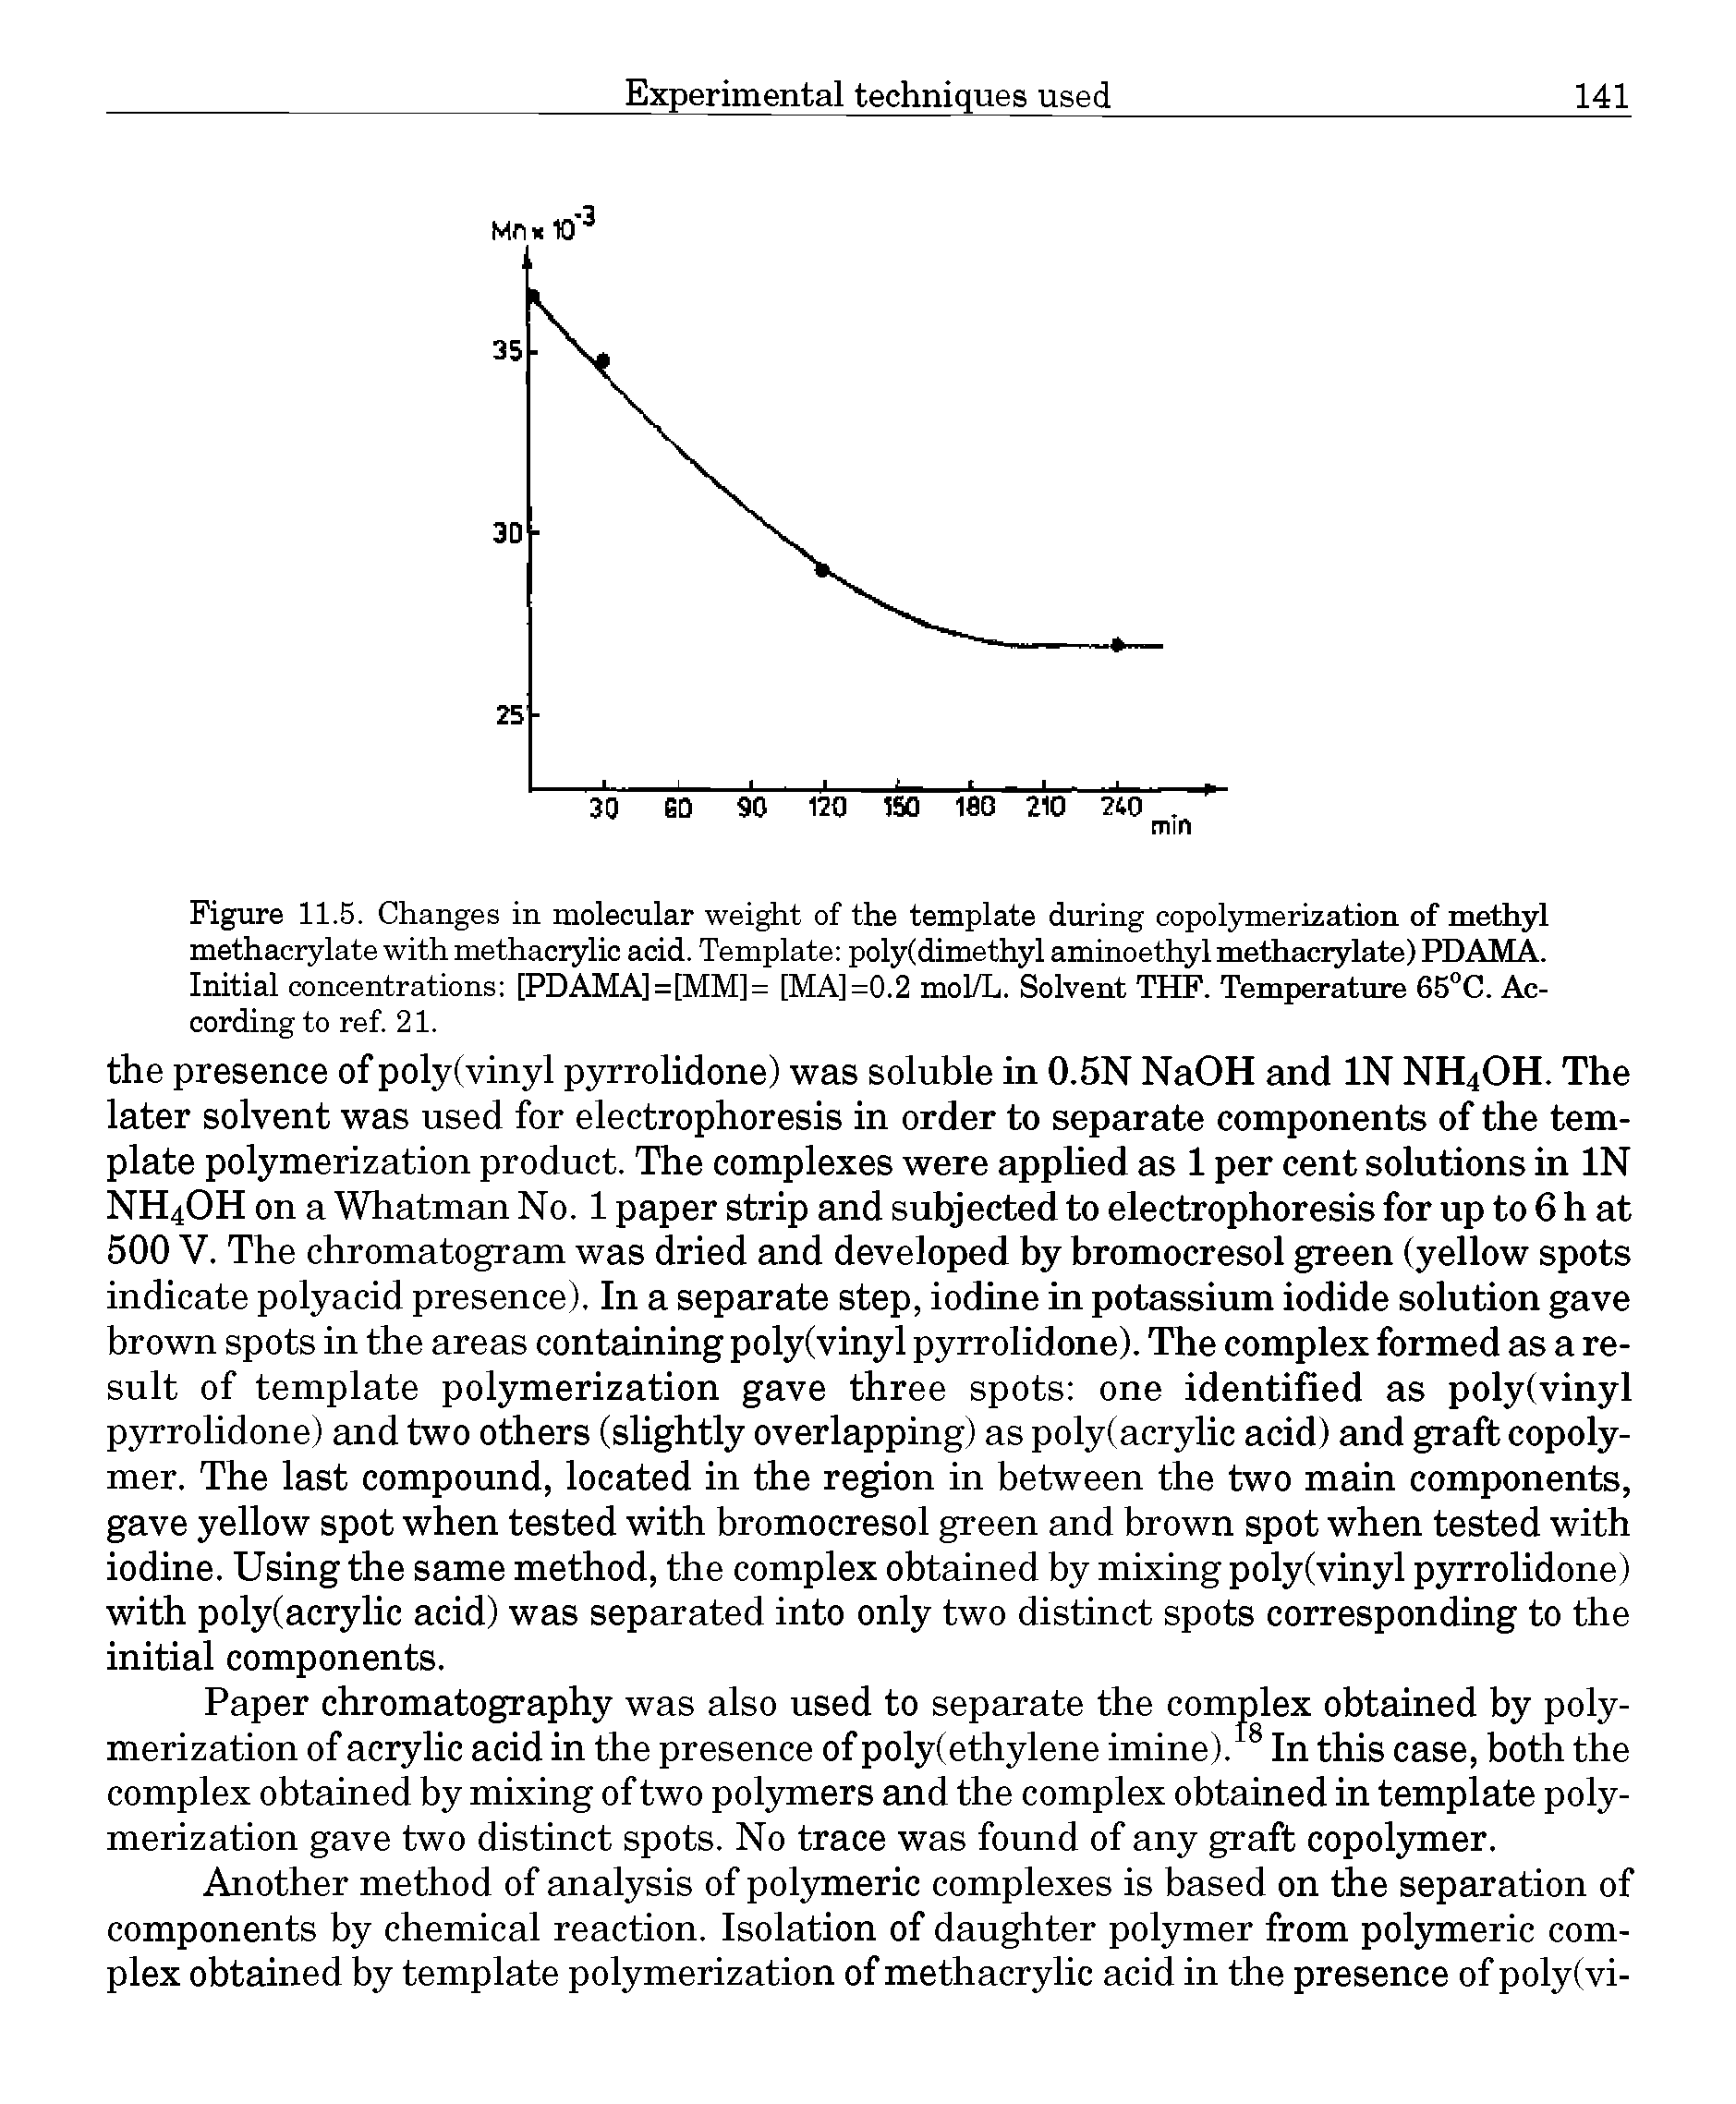 Figure 11.5. Changes in molecular weight of the template during copolymerization of methyl methacrylate with methacrylic acid. Template poly(dimethyl aminoethyl methacrylate) PDAMA.